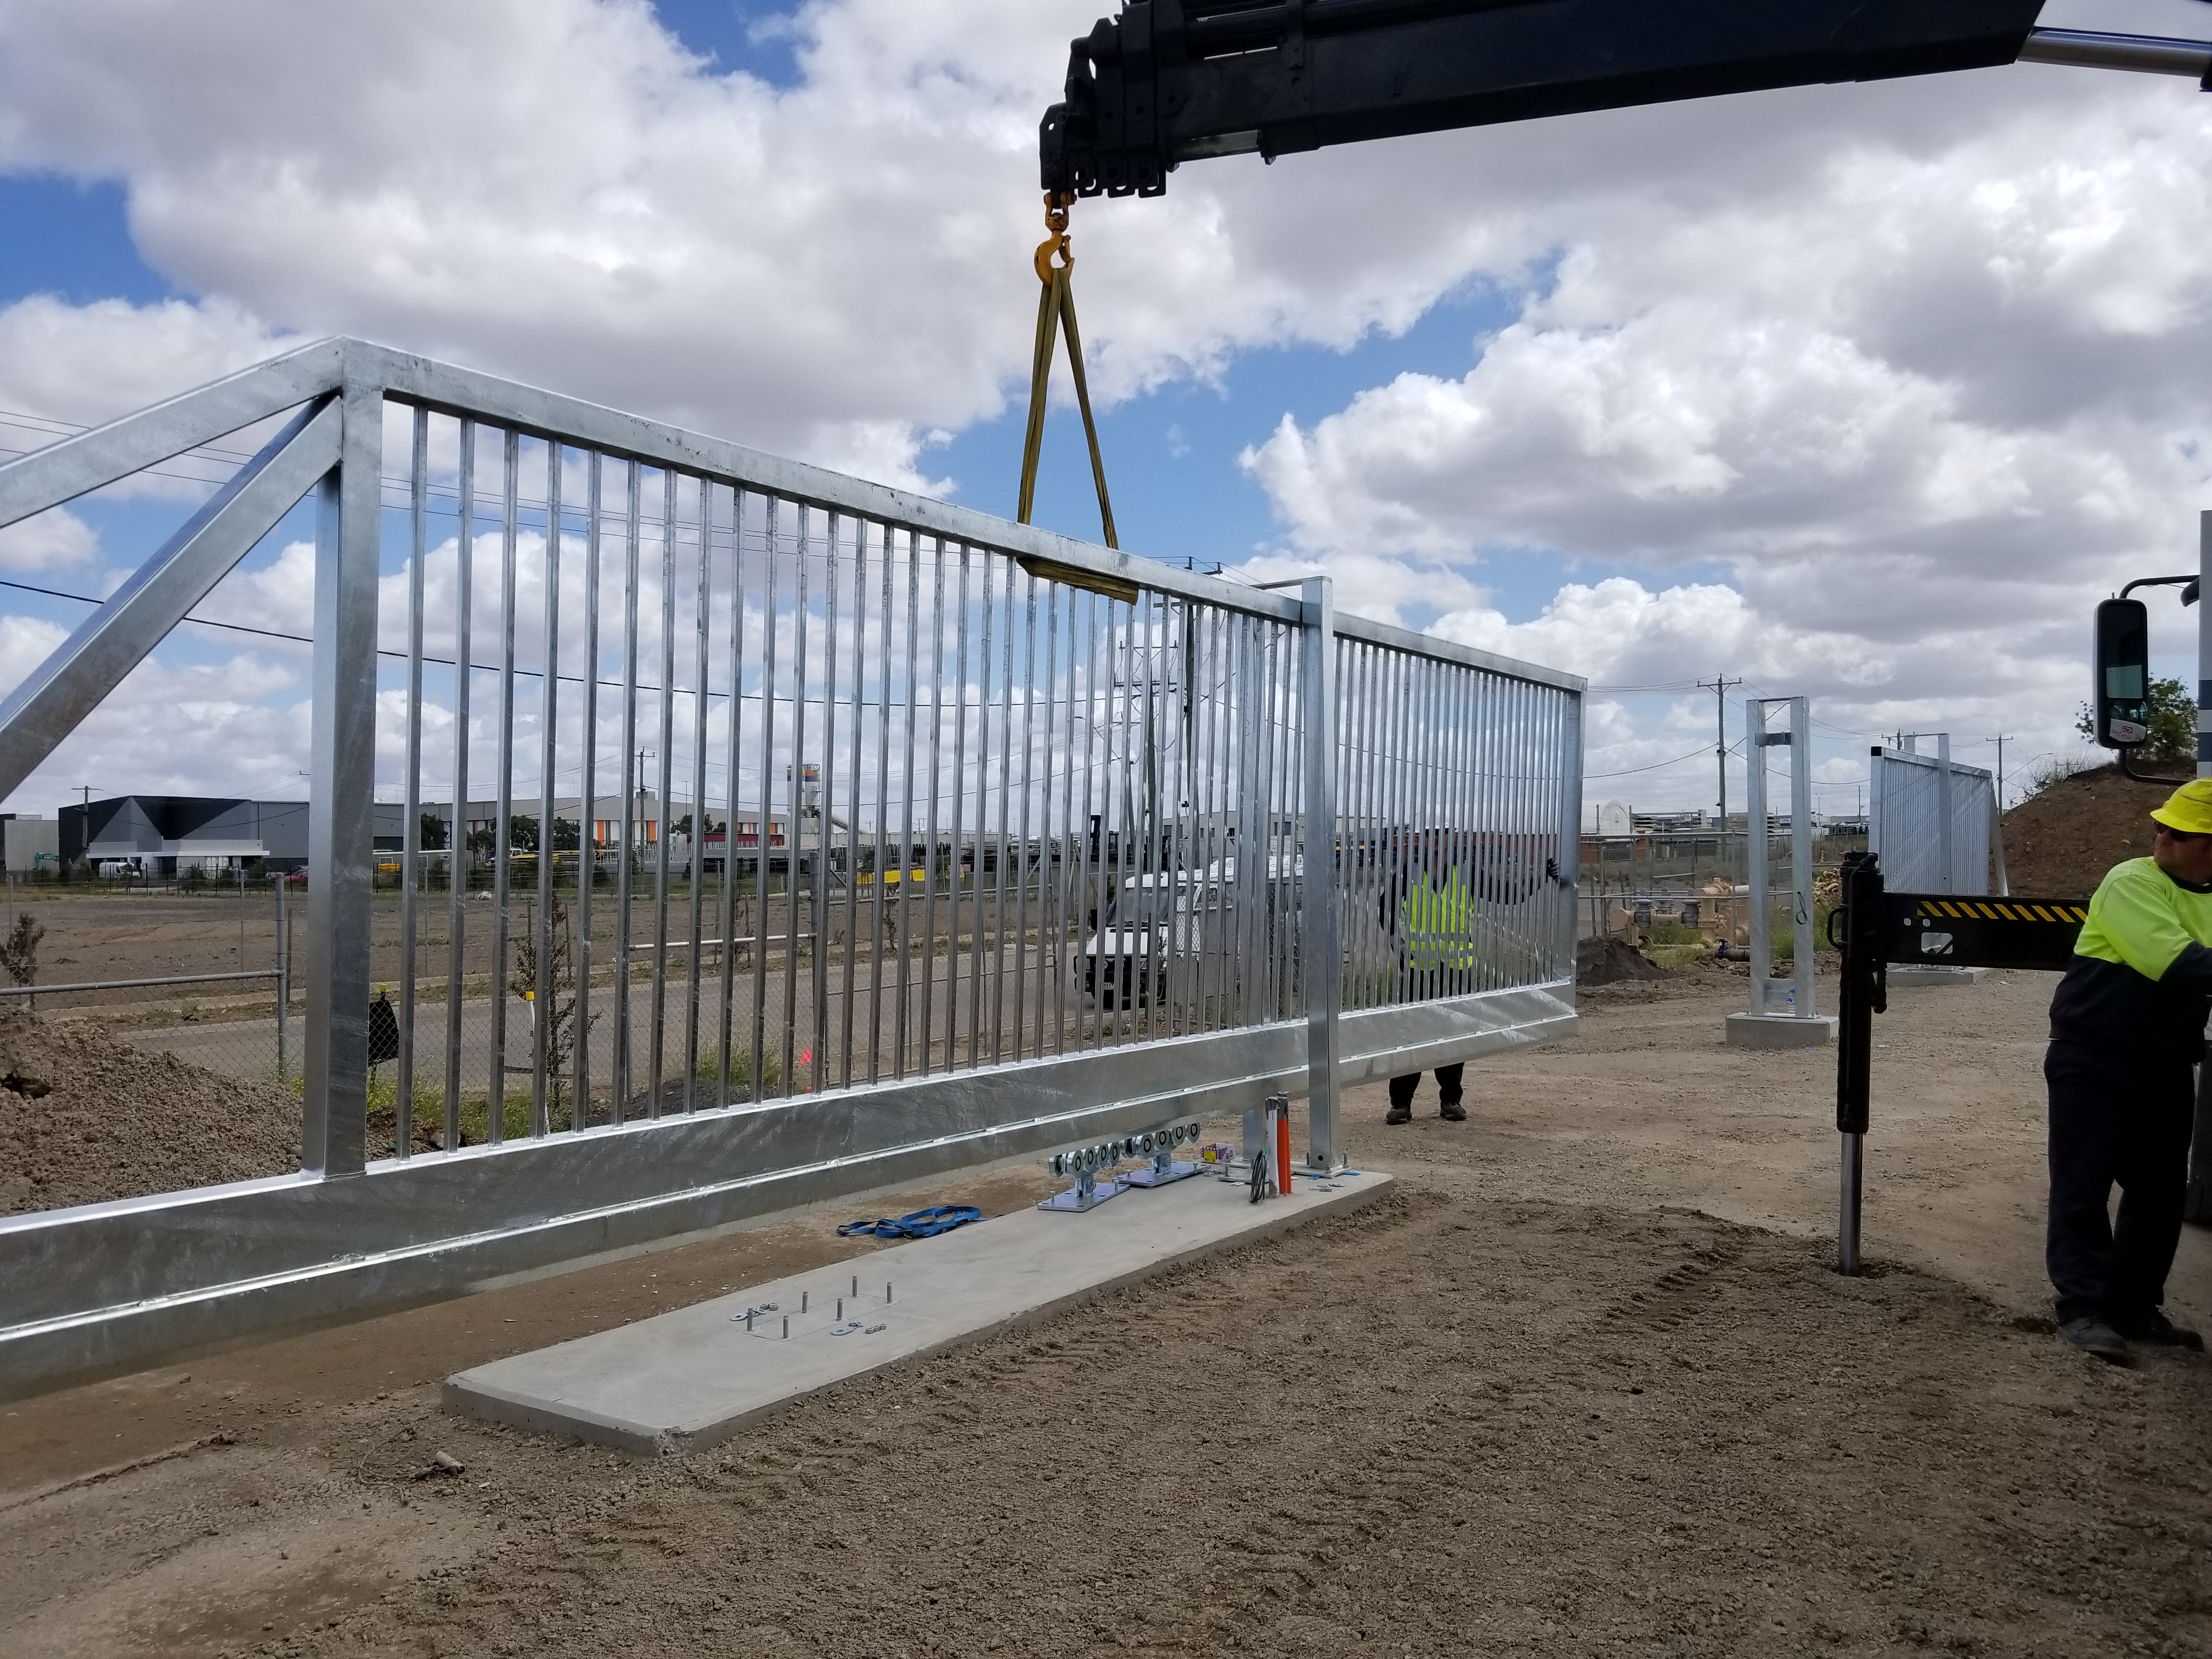 Effective colllaboroation with a variety of contractors is especially important for large automatic gates projects like this one.